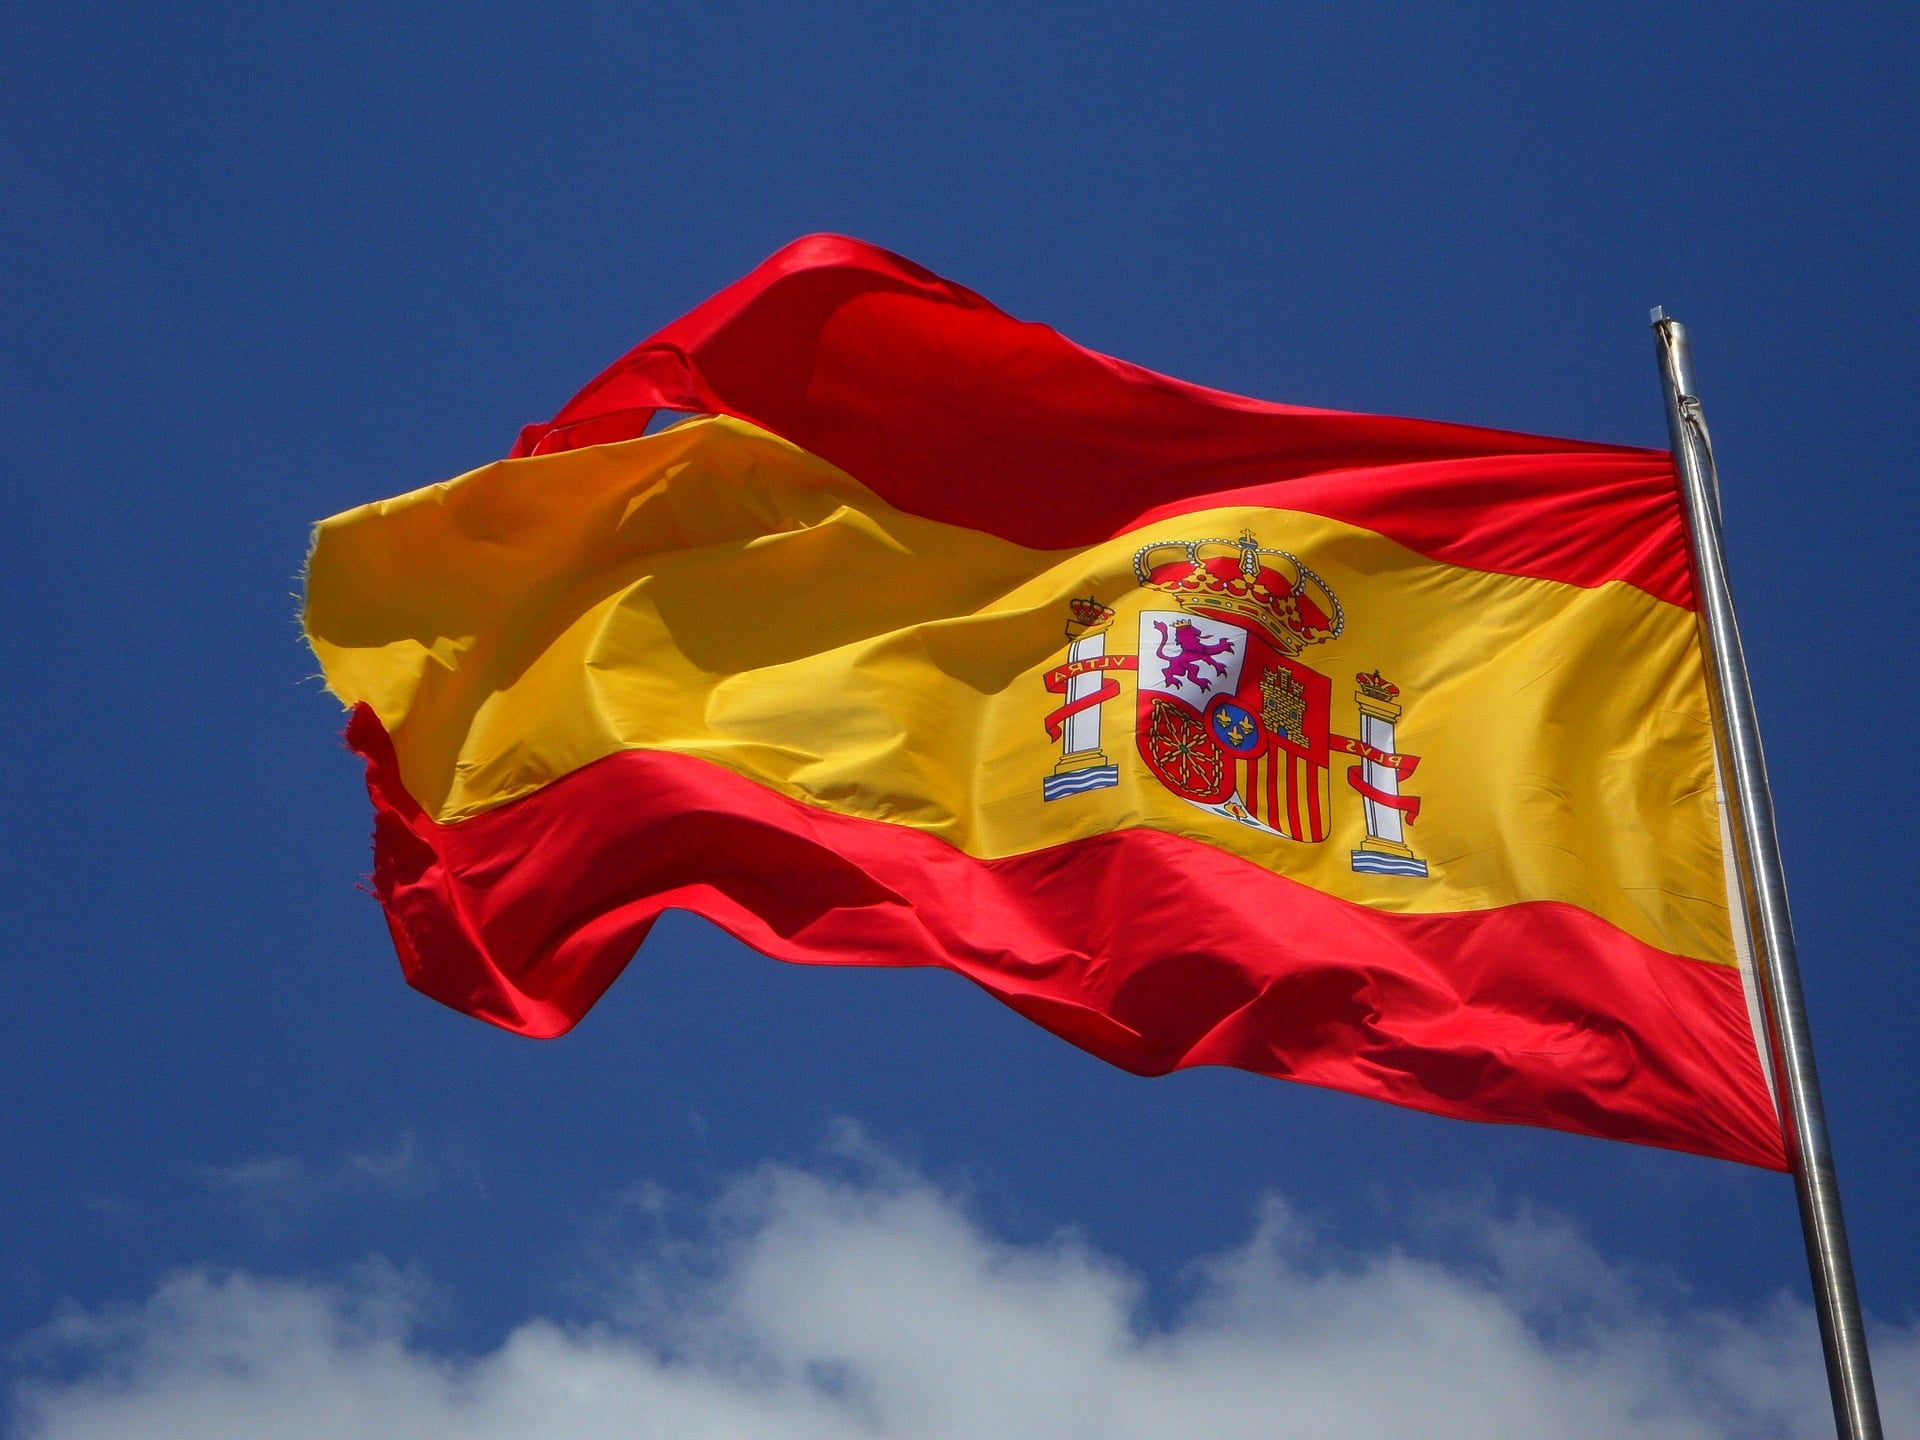 Spanish flag in the wind.&nbsp;Source: Pixabay